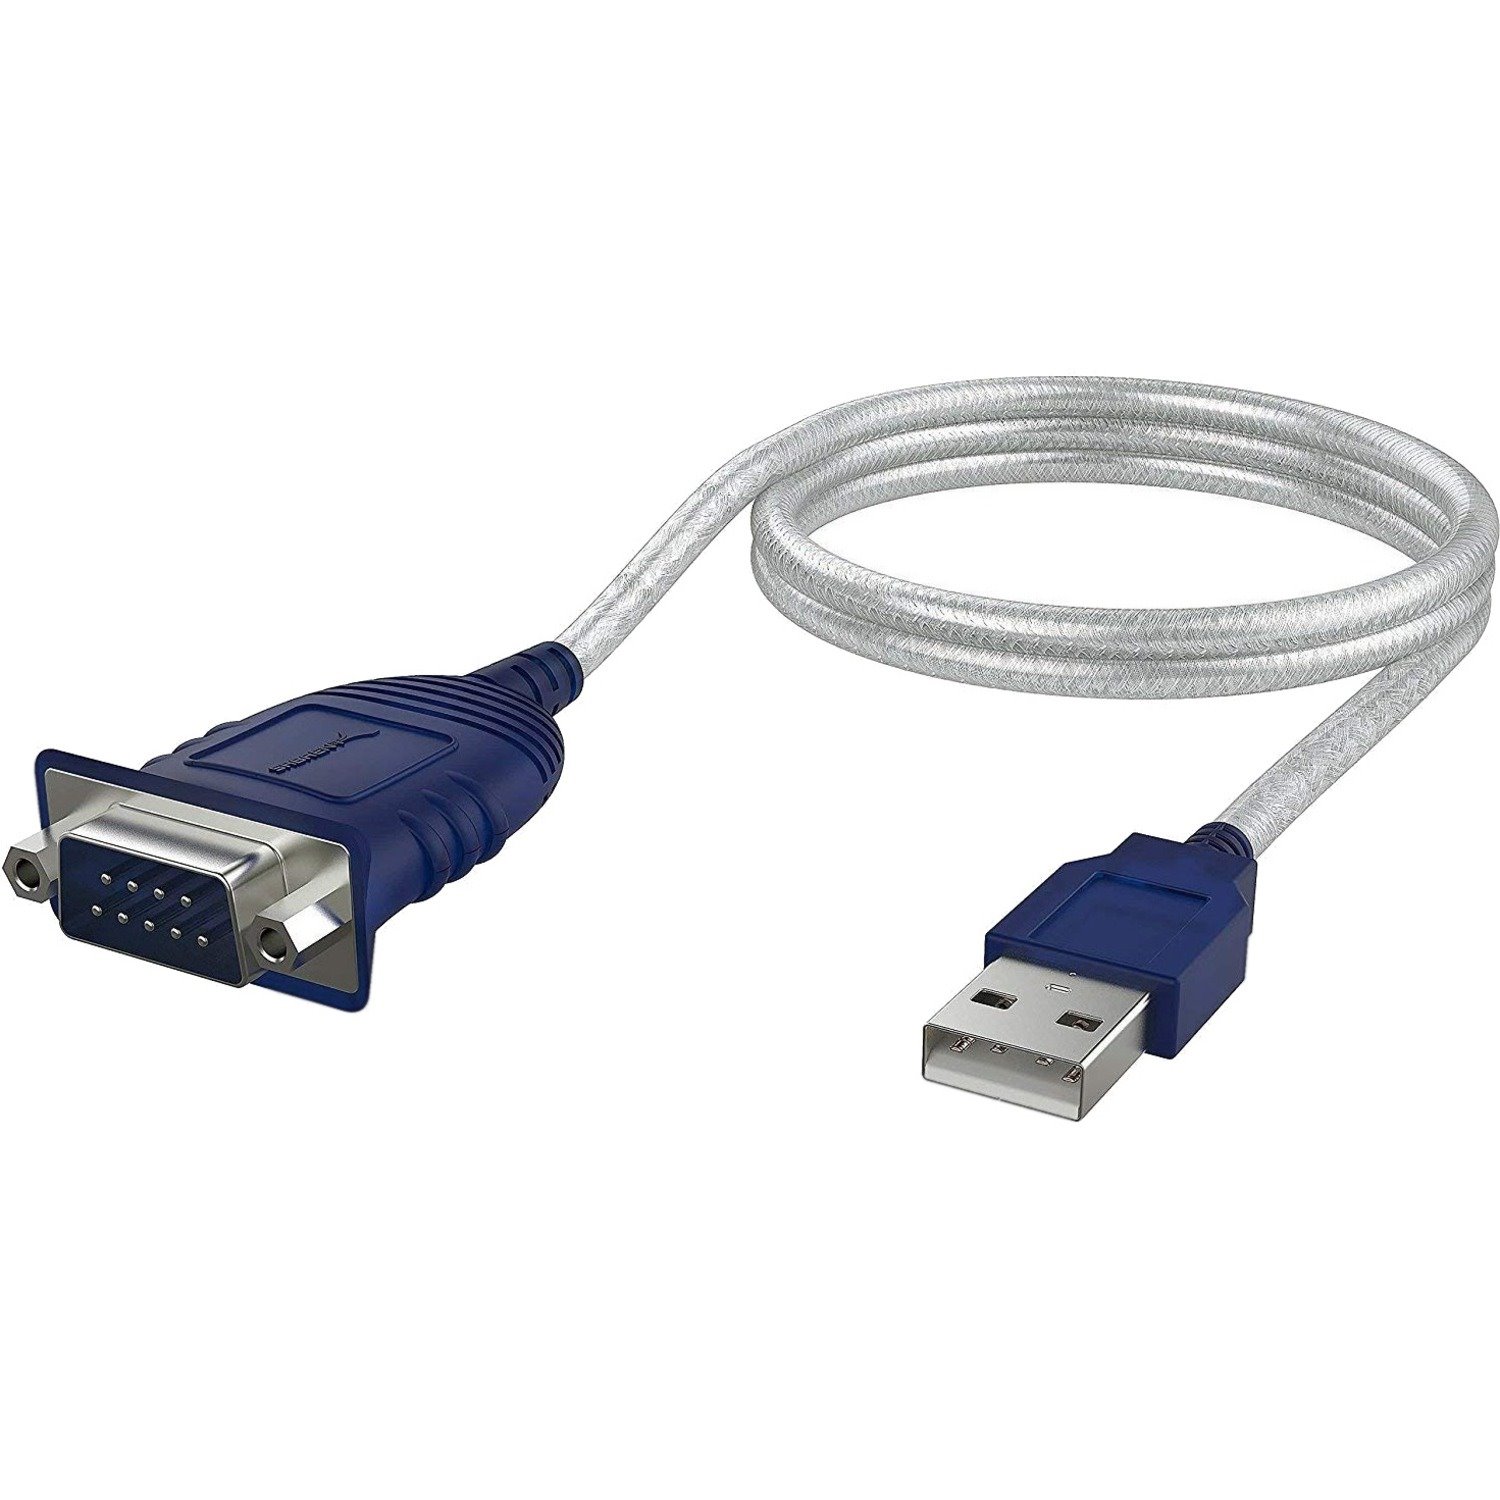 Sabrent USB 2.0 To Serial DB9 Male (9 Pin) RS232 Cable Adapter (CB-DB9P)